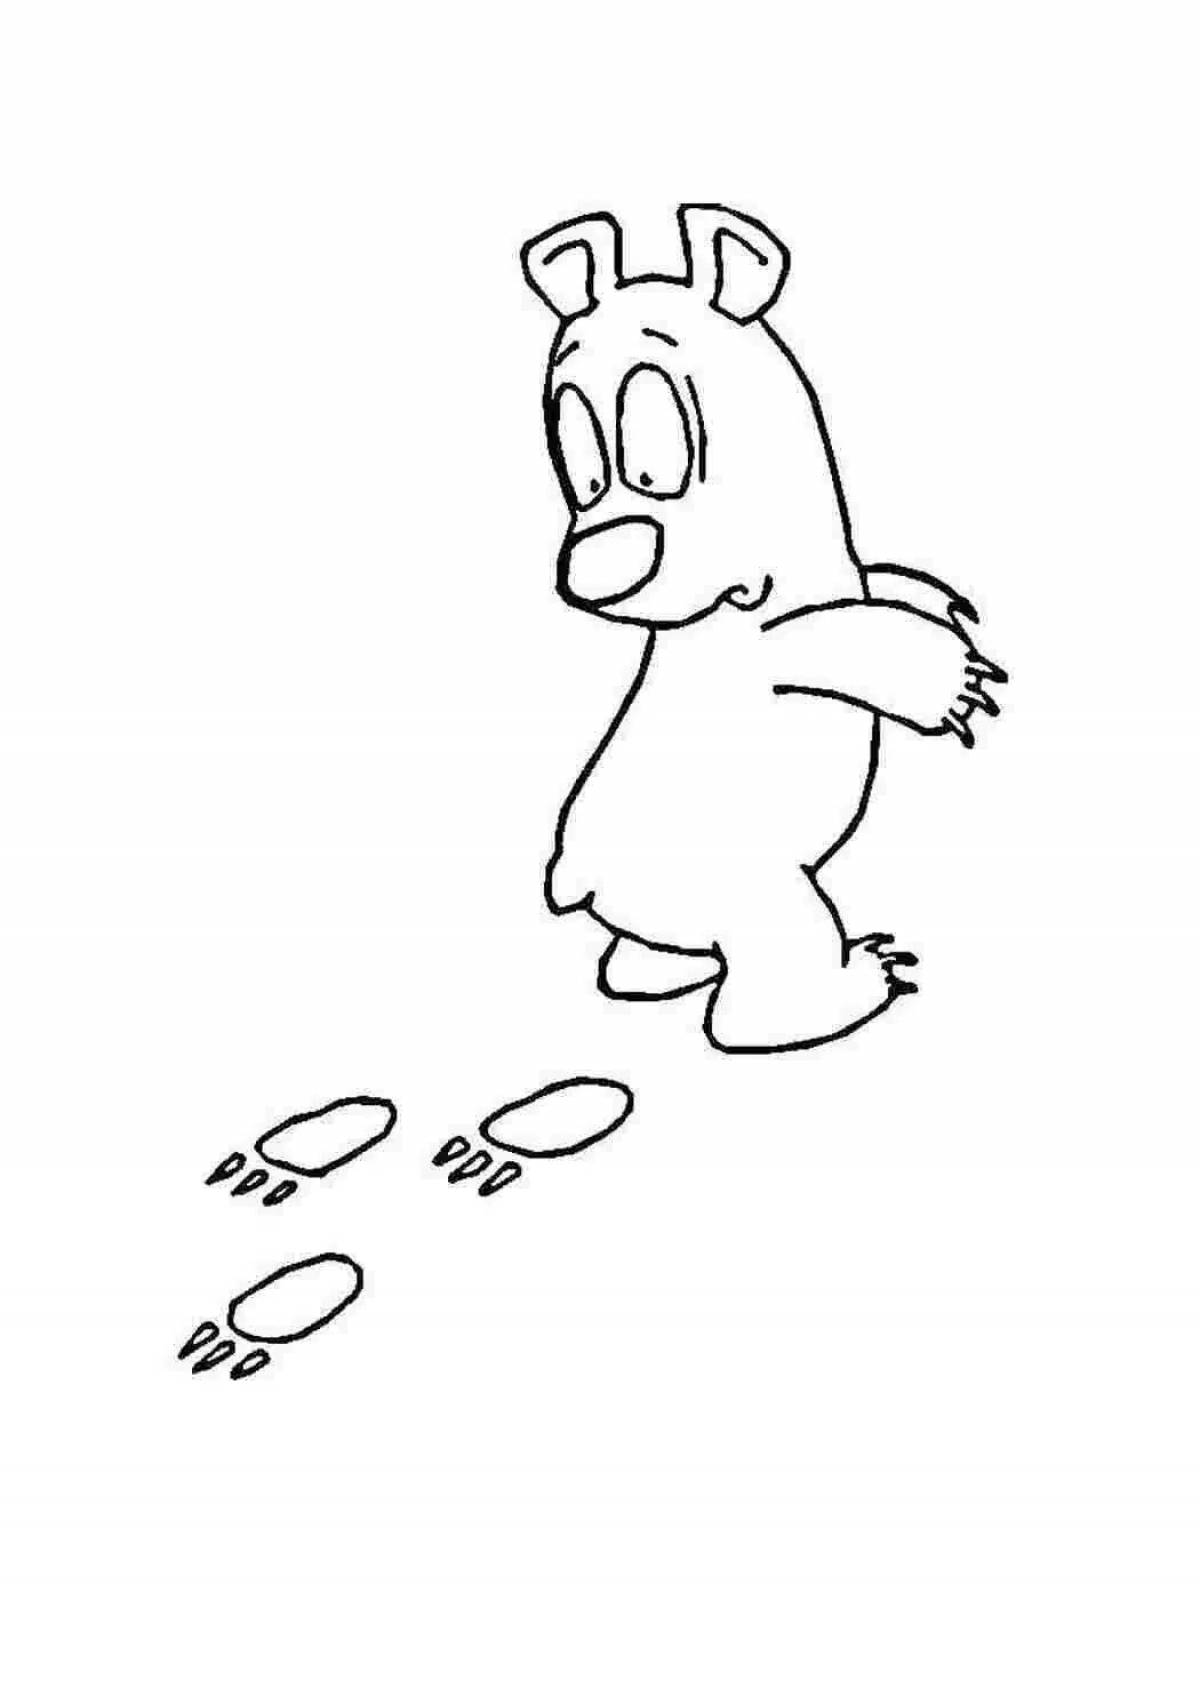 Coloring book prominent hare footprints